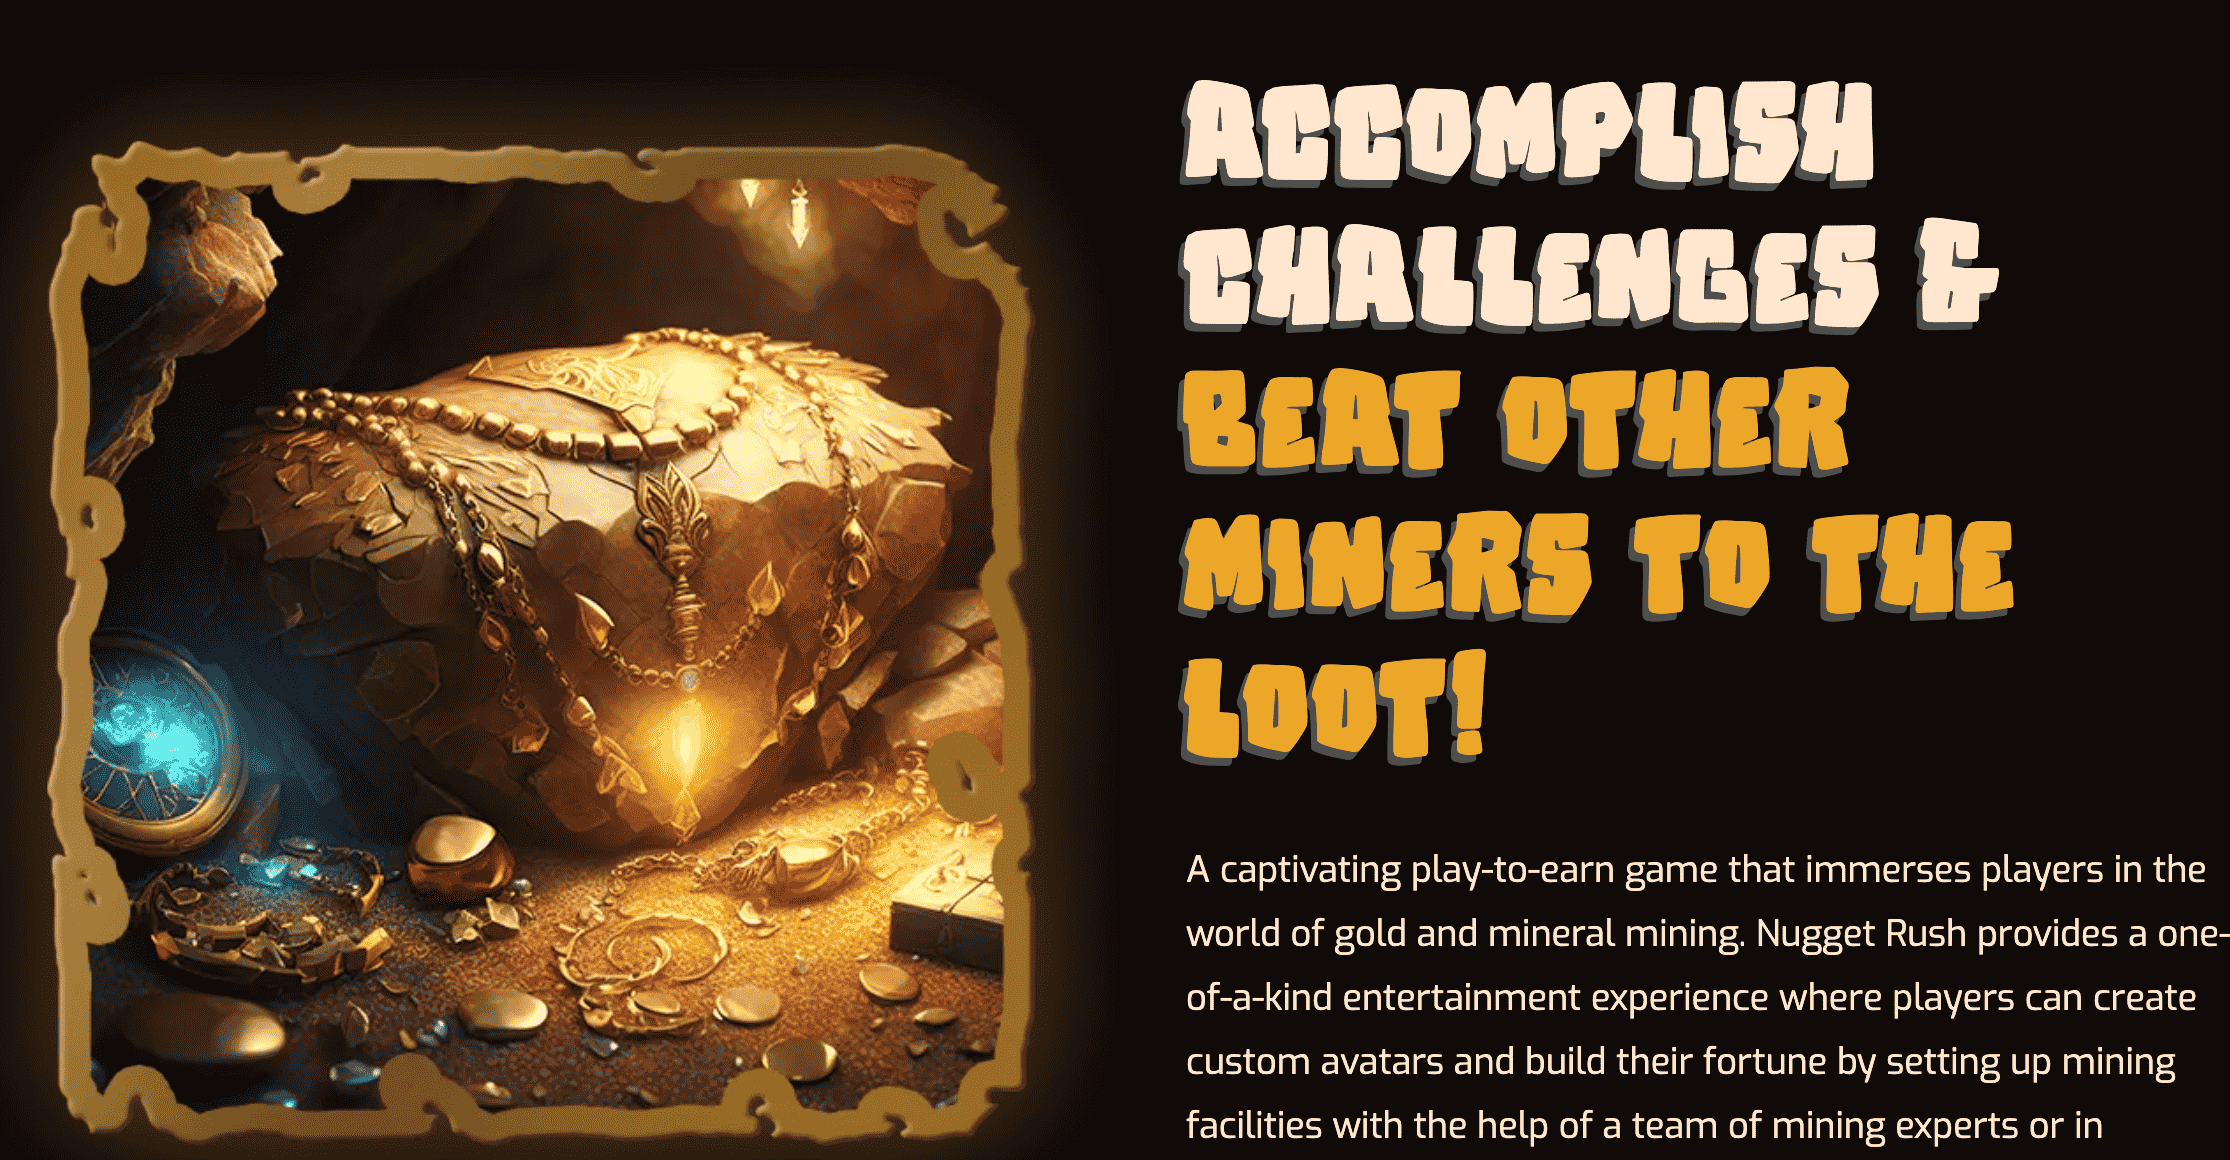 NuggetRush challenges